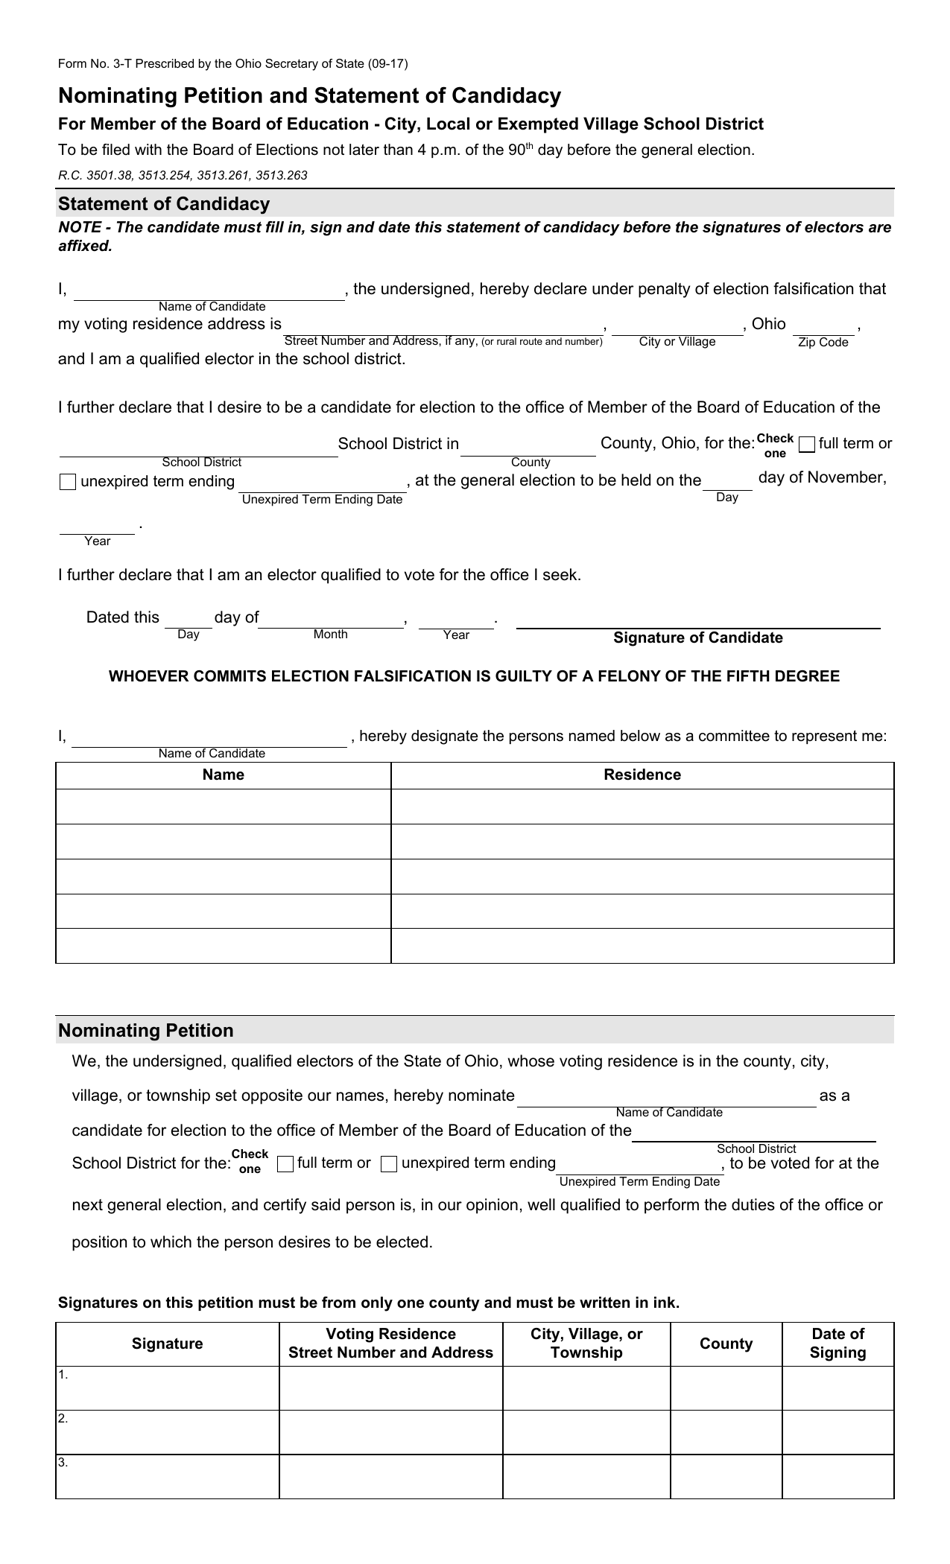 Form 3-T Nominating Petition and Statement of Candidacy for Member of the Board of Education - City, Local or Exempted Village School District - Ohio, Page 1